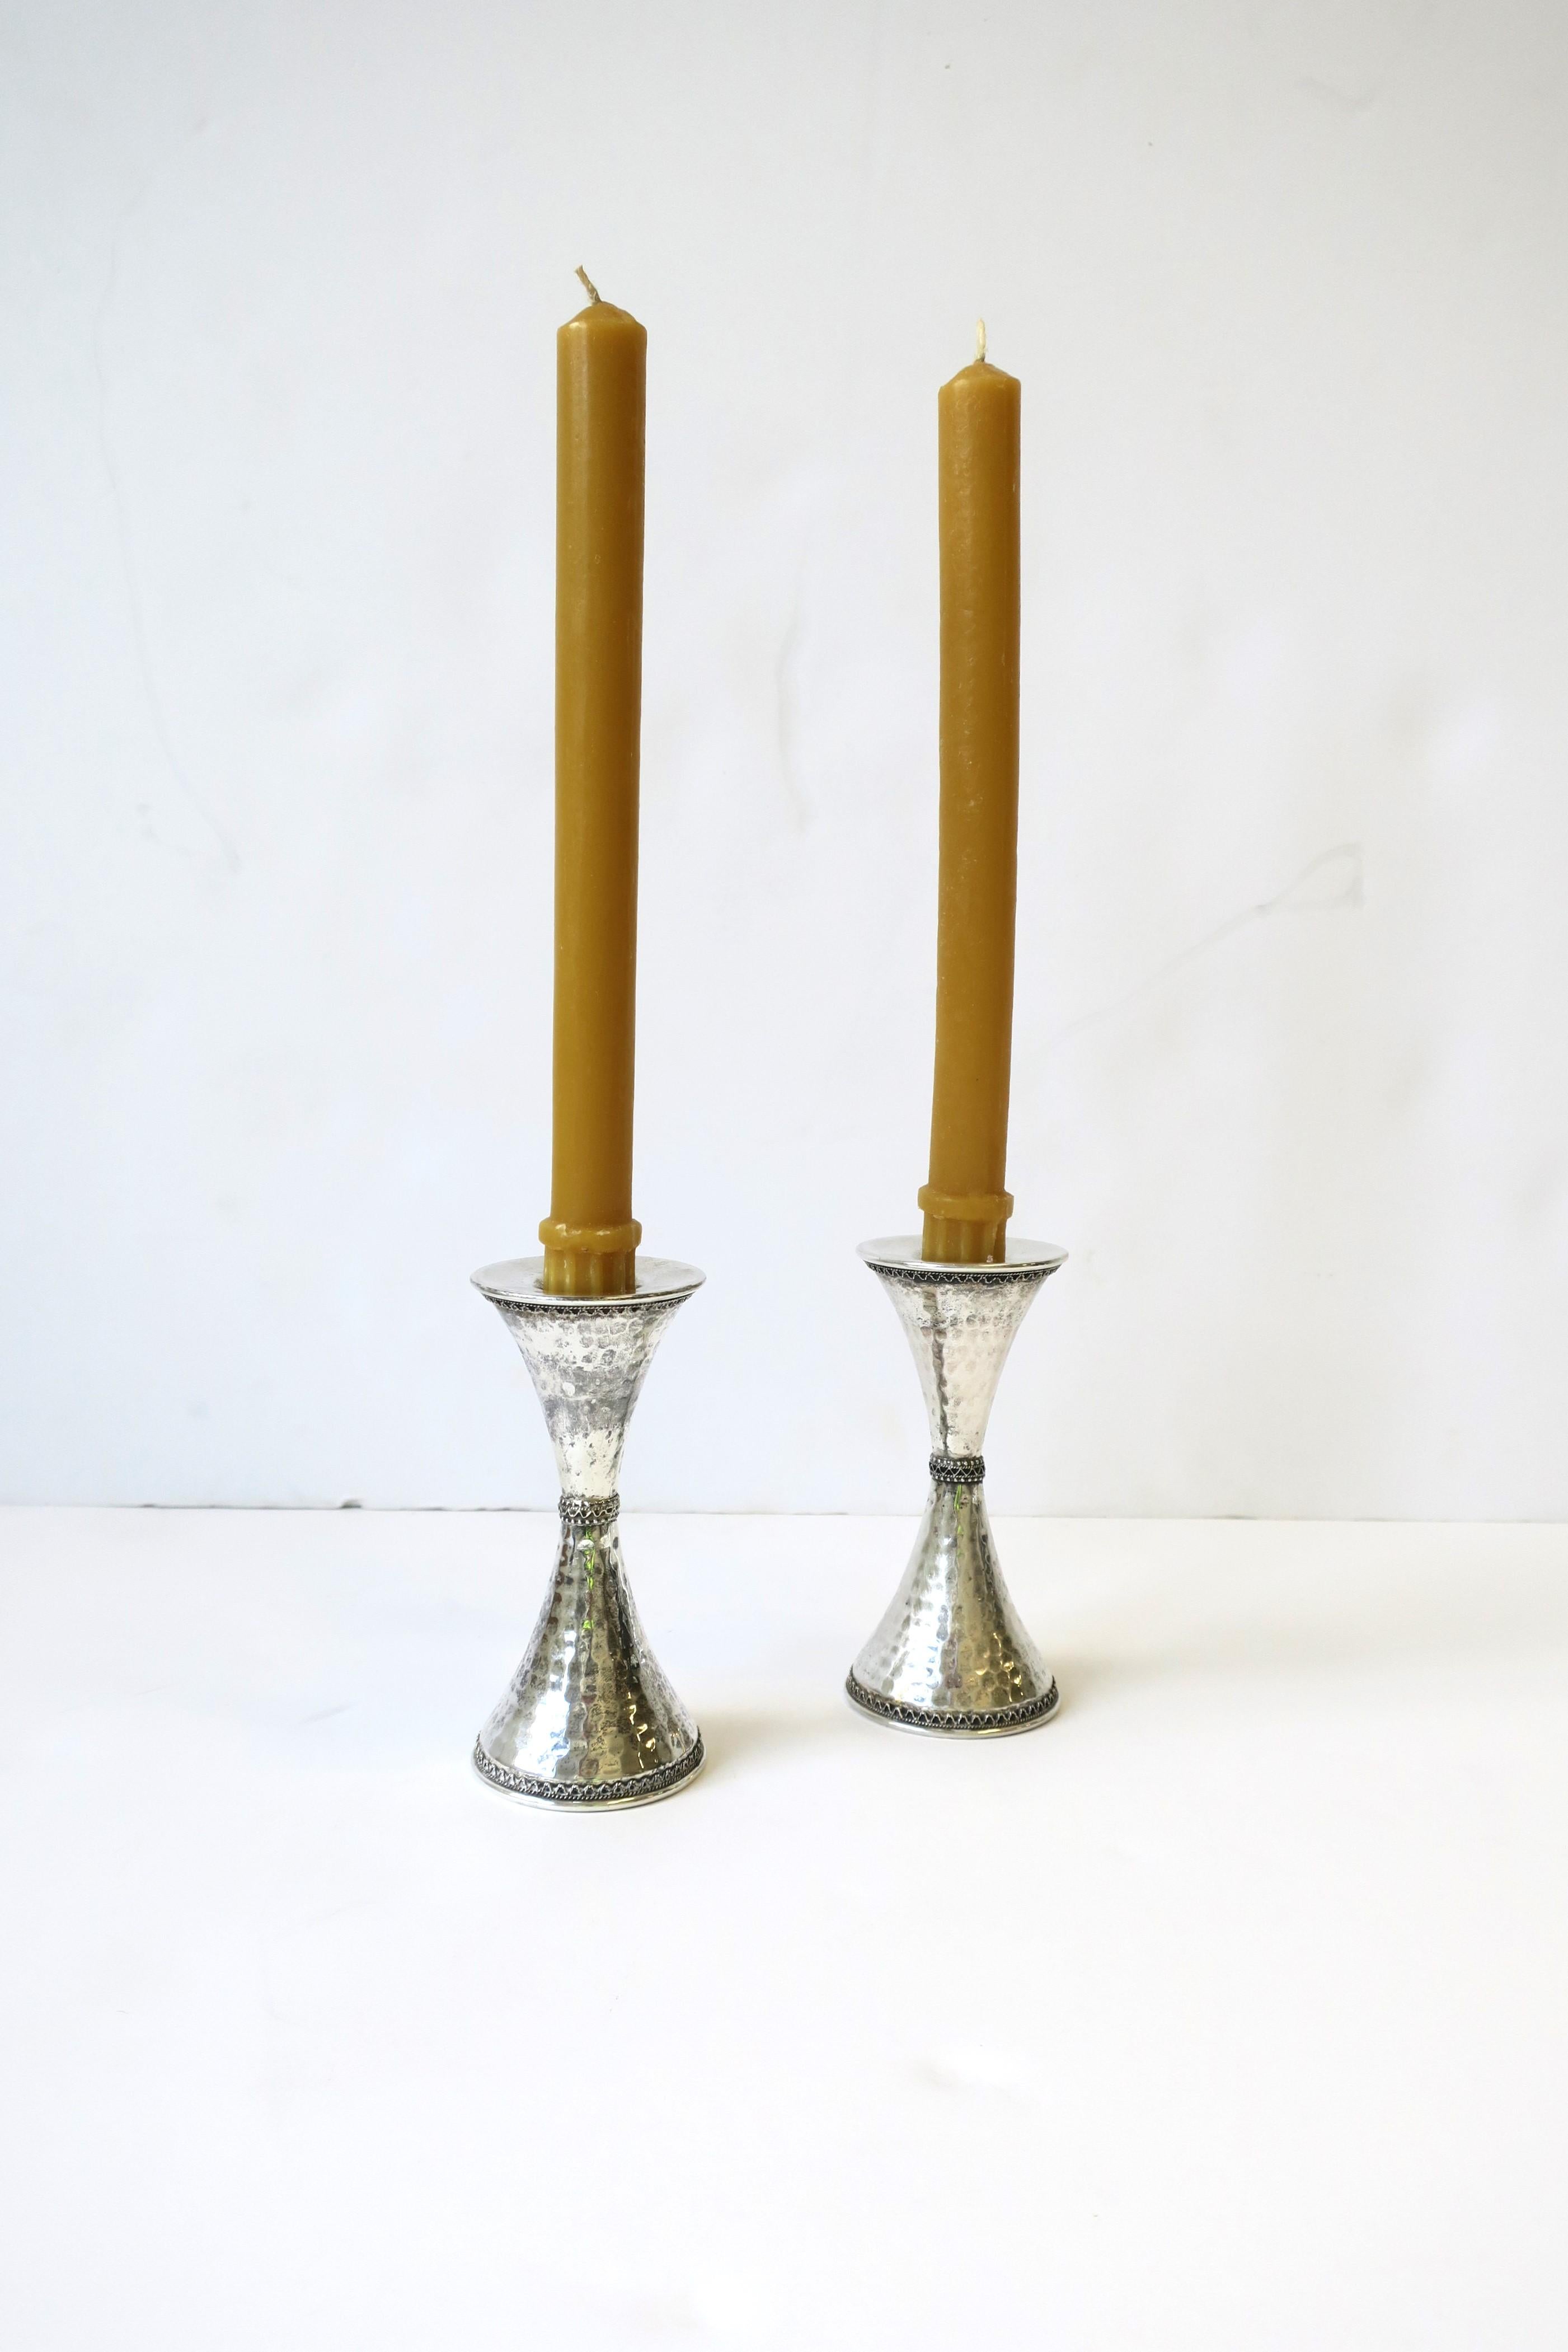 Sterling Silver Candlesticks Holders Hourglass Shape Hammered Design, Pair In Good Condition For Sale In New York, NY